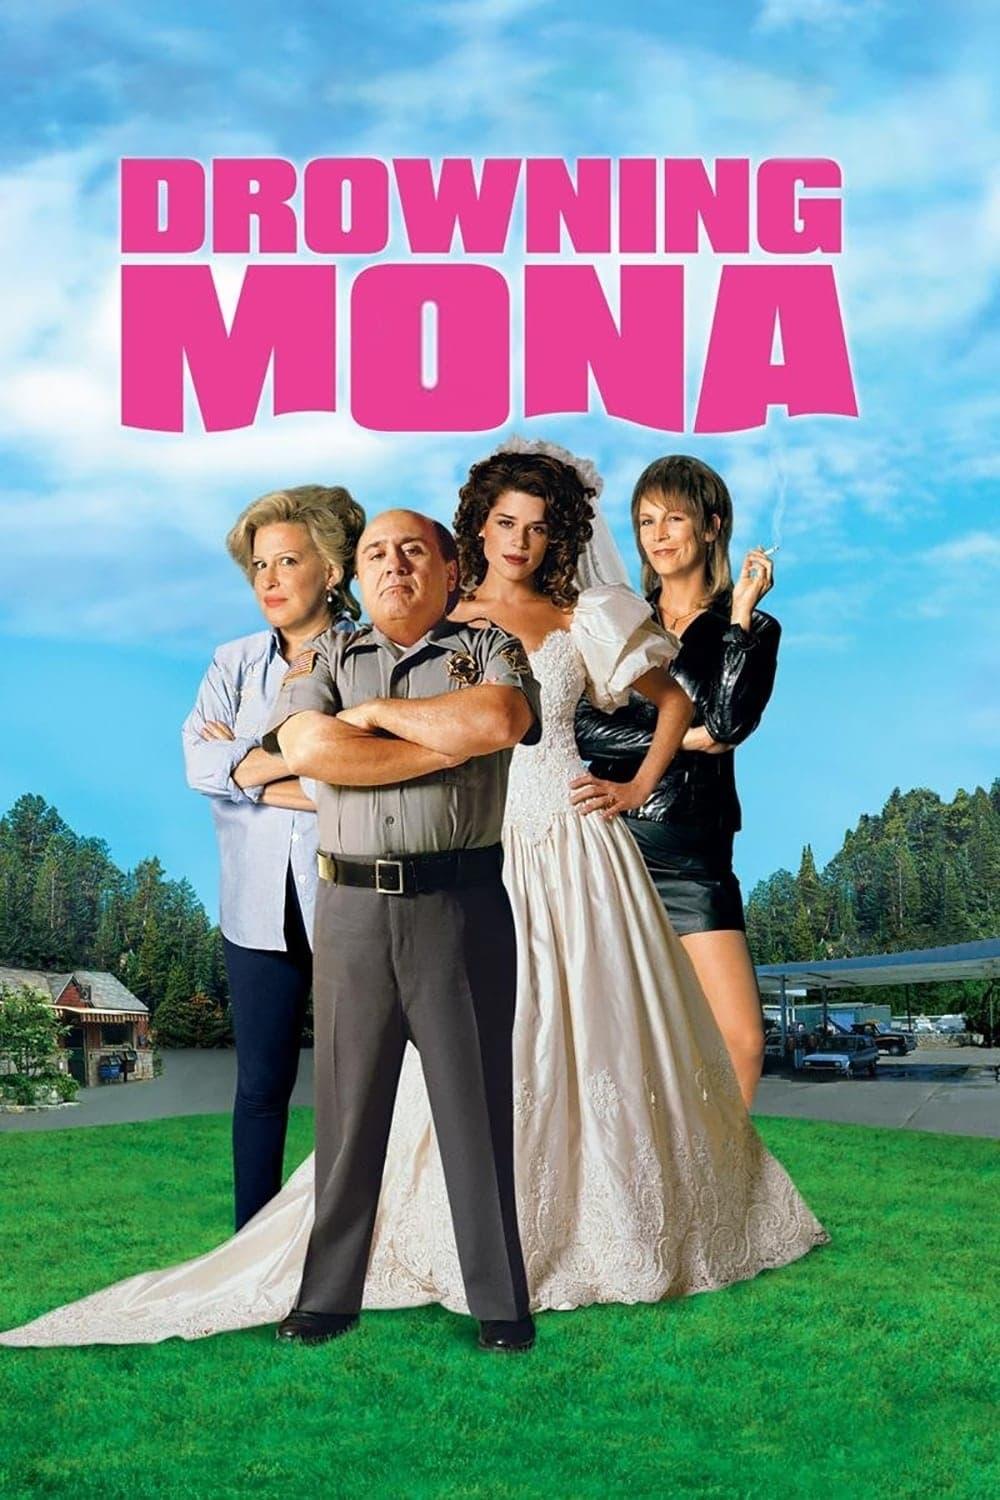 Drowning Mona poster